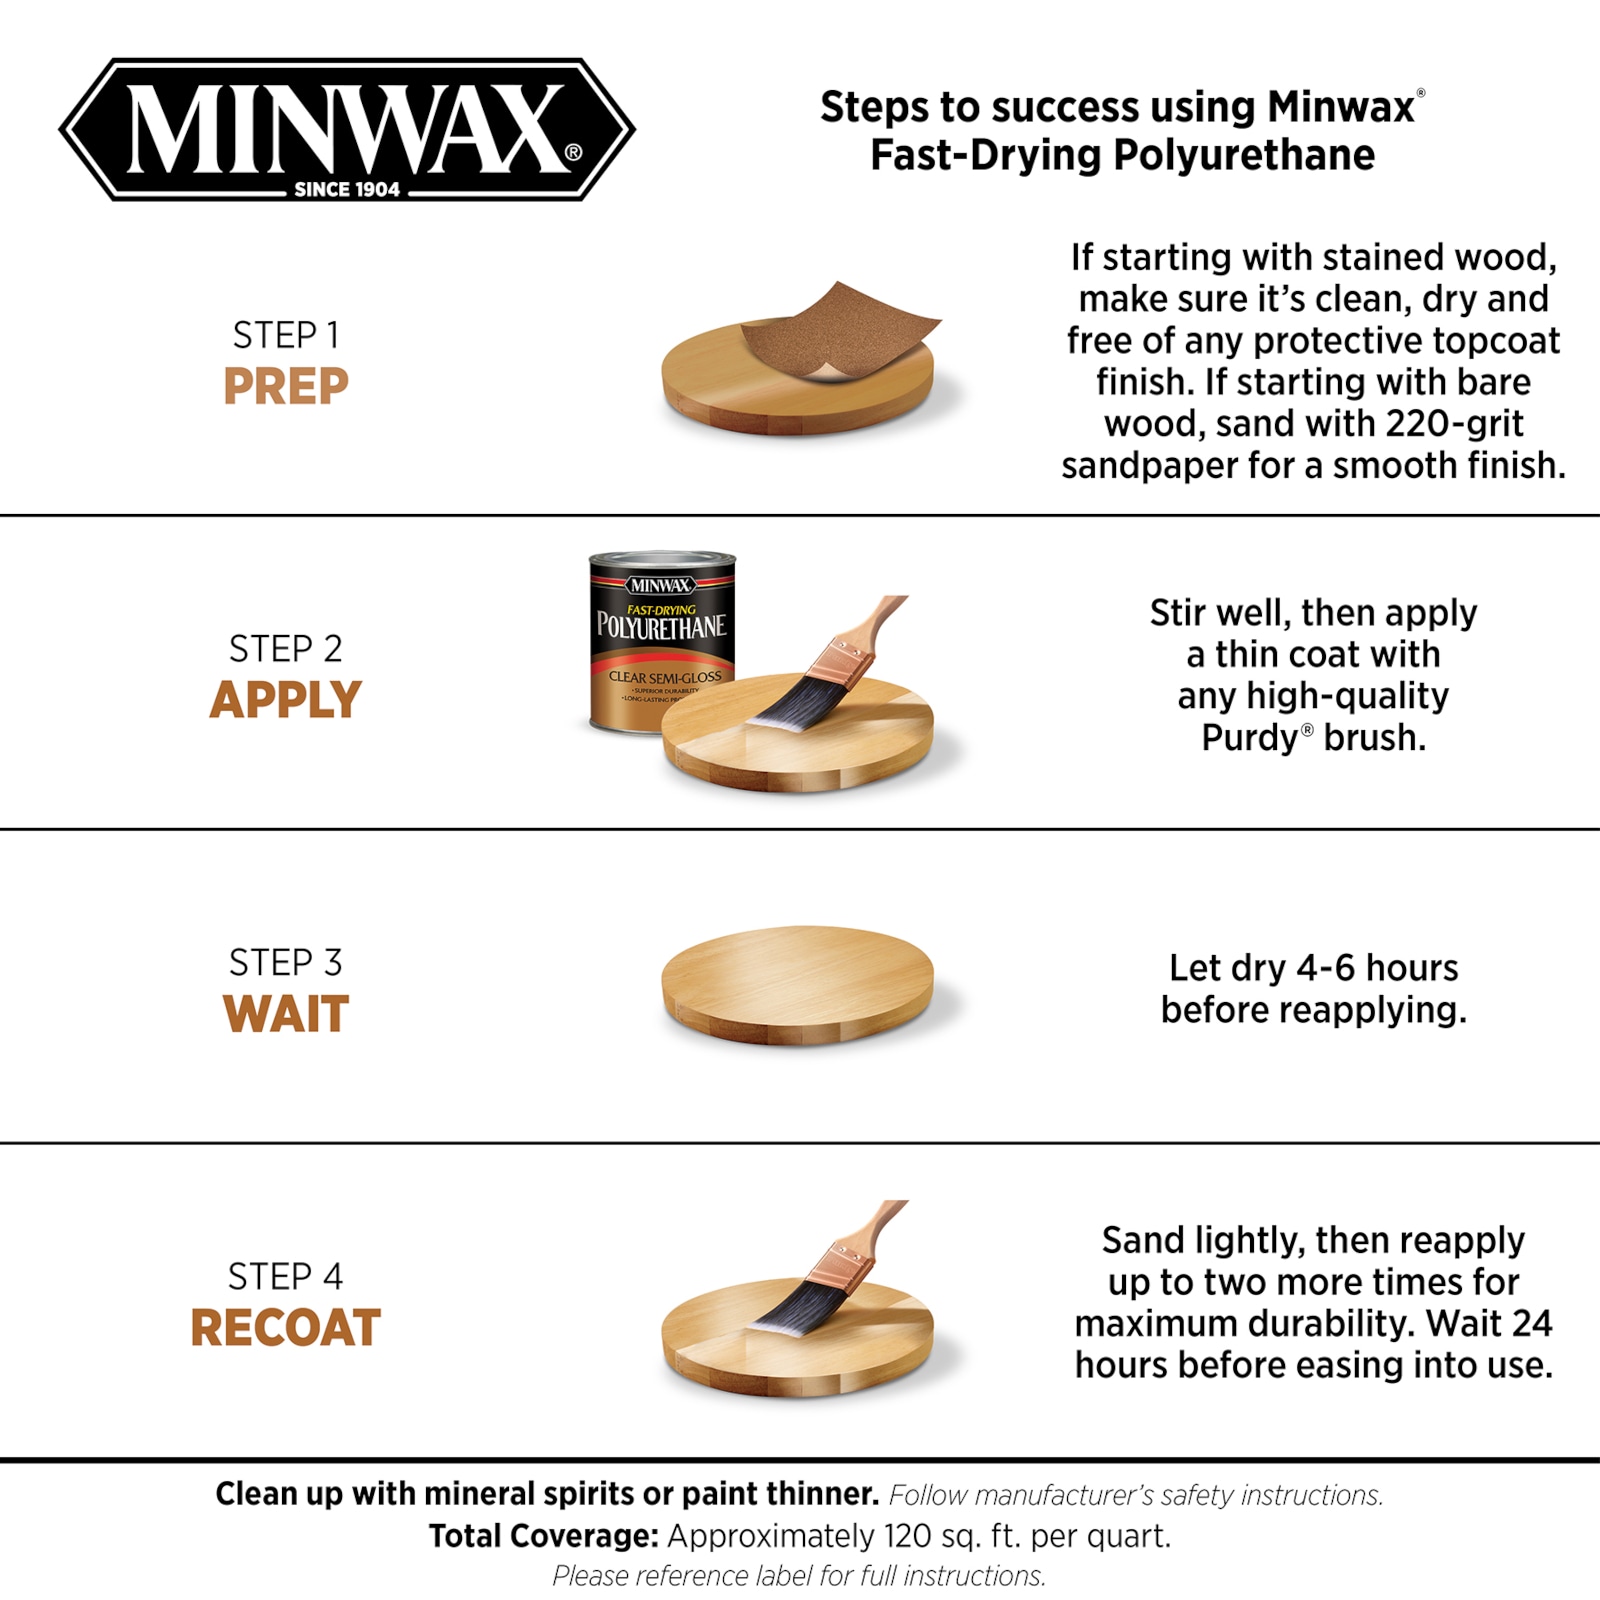 Minwax Clear Gloss Oil-Based Polyurethane (1-Quart) in the Sealers